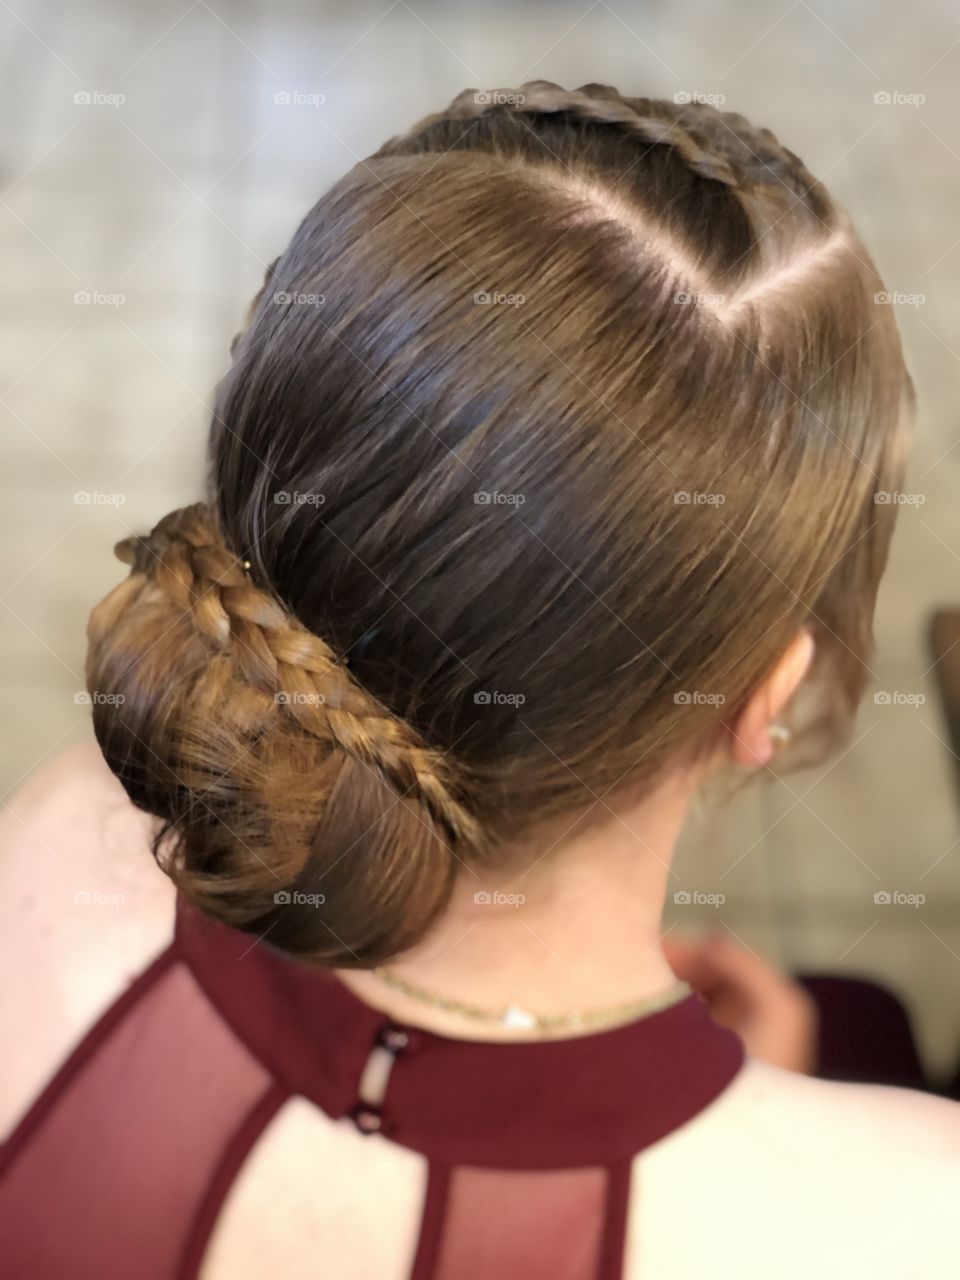 Brunette with braided hair ready for prom or special event 